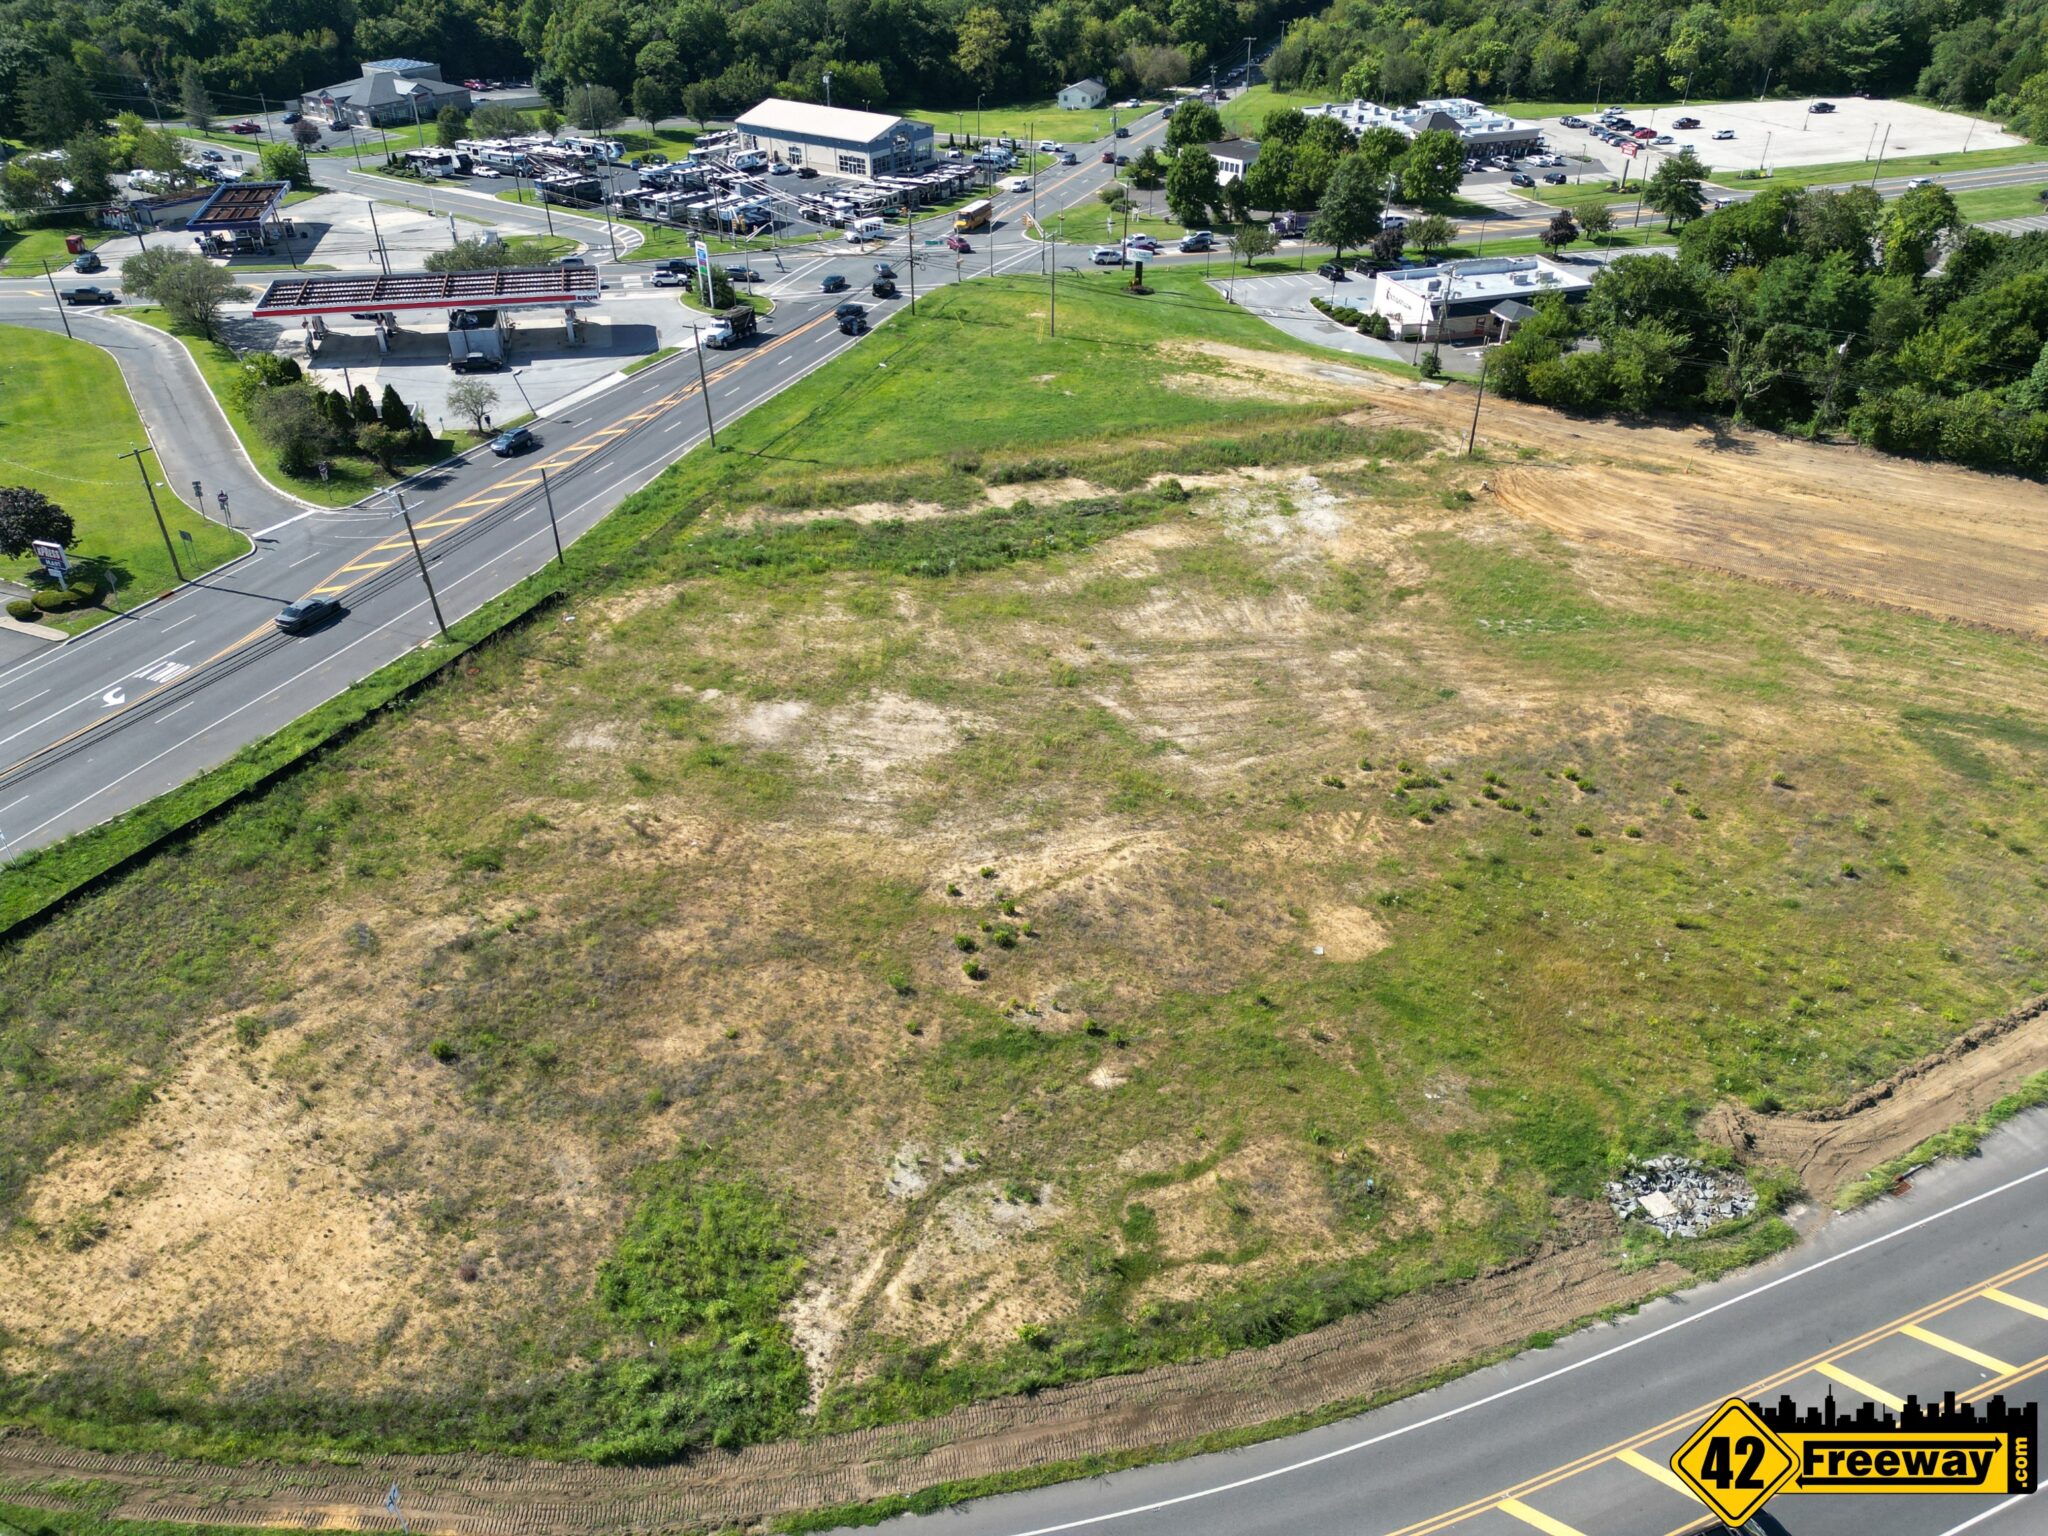 Wawa at 5-Points Washington Twp Now Has Full Approvals. Dirt Is Getting